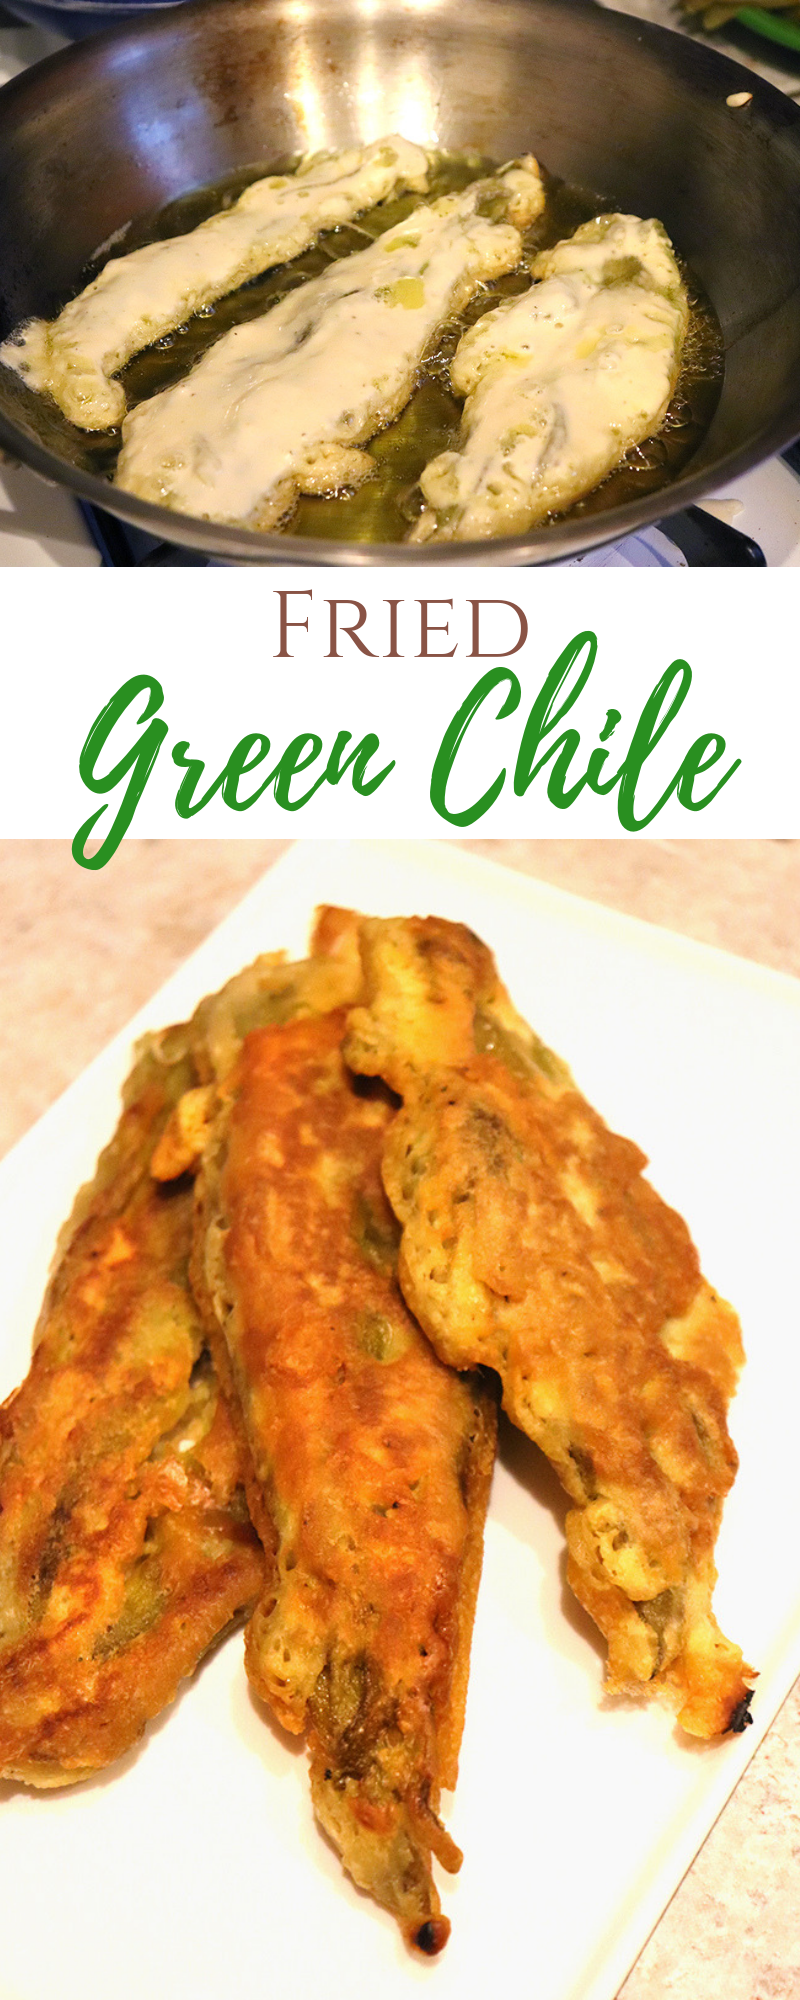 Fried Green Chile Strips made with New Mexican Green Chile | NewMexicanFoodie.com